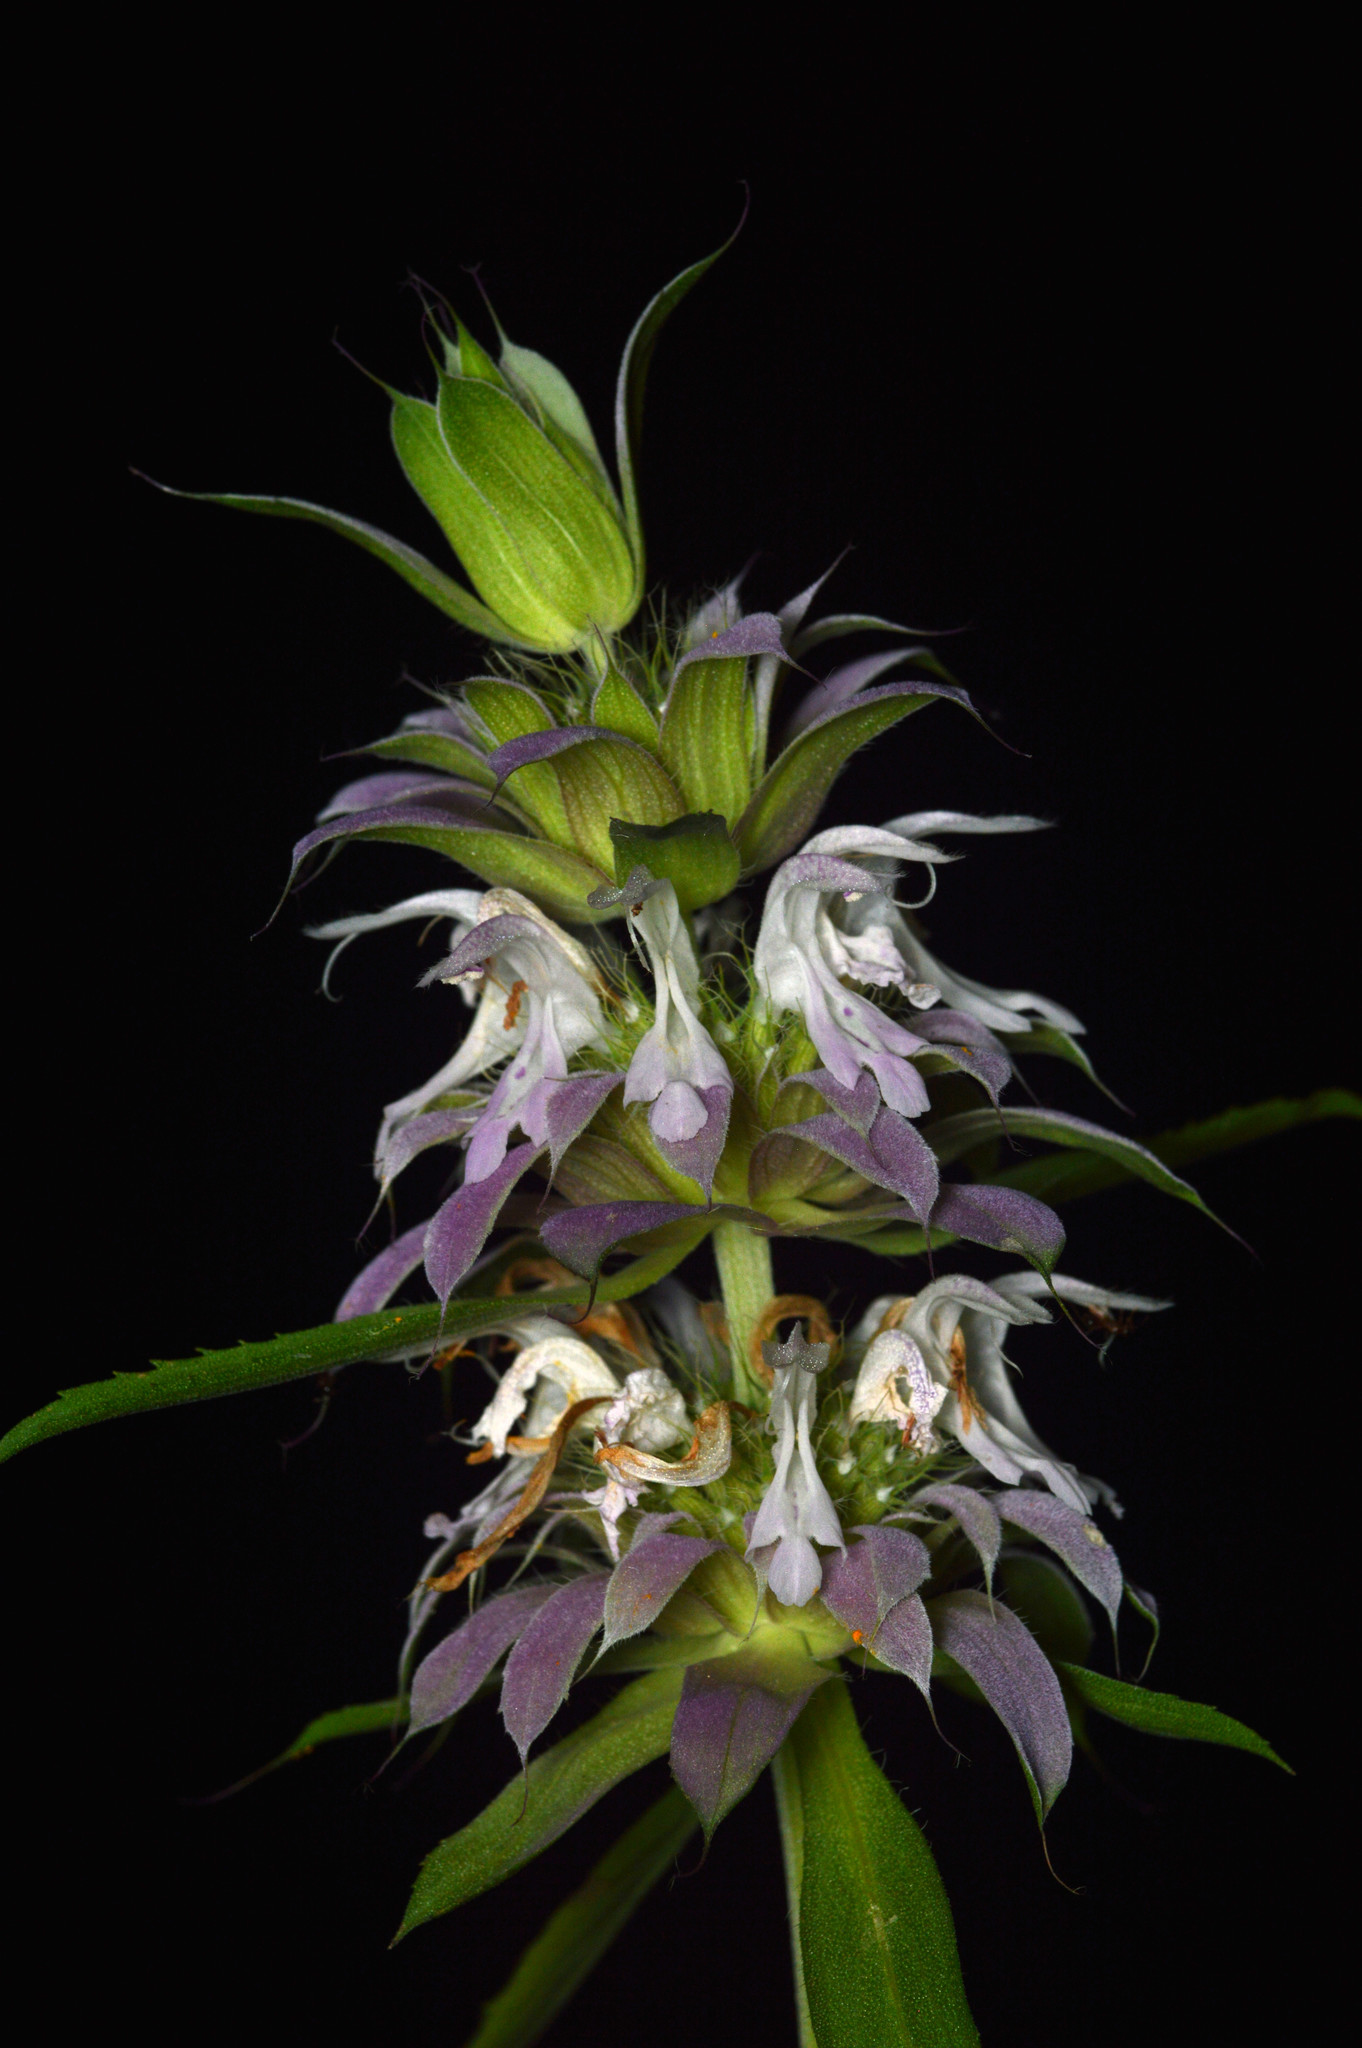 The Scientific Name is Monarda citriodora var. citriodora. You will likely hear them called Lemon Bergamot. This picture shows the Whitish or lavender leaf-like bracts subtend each whorl in the elongated spike. of Monarda citriodora var. citriodora